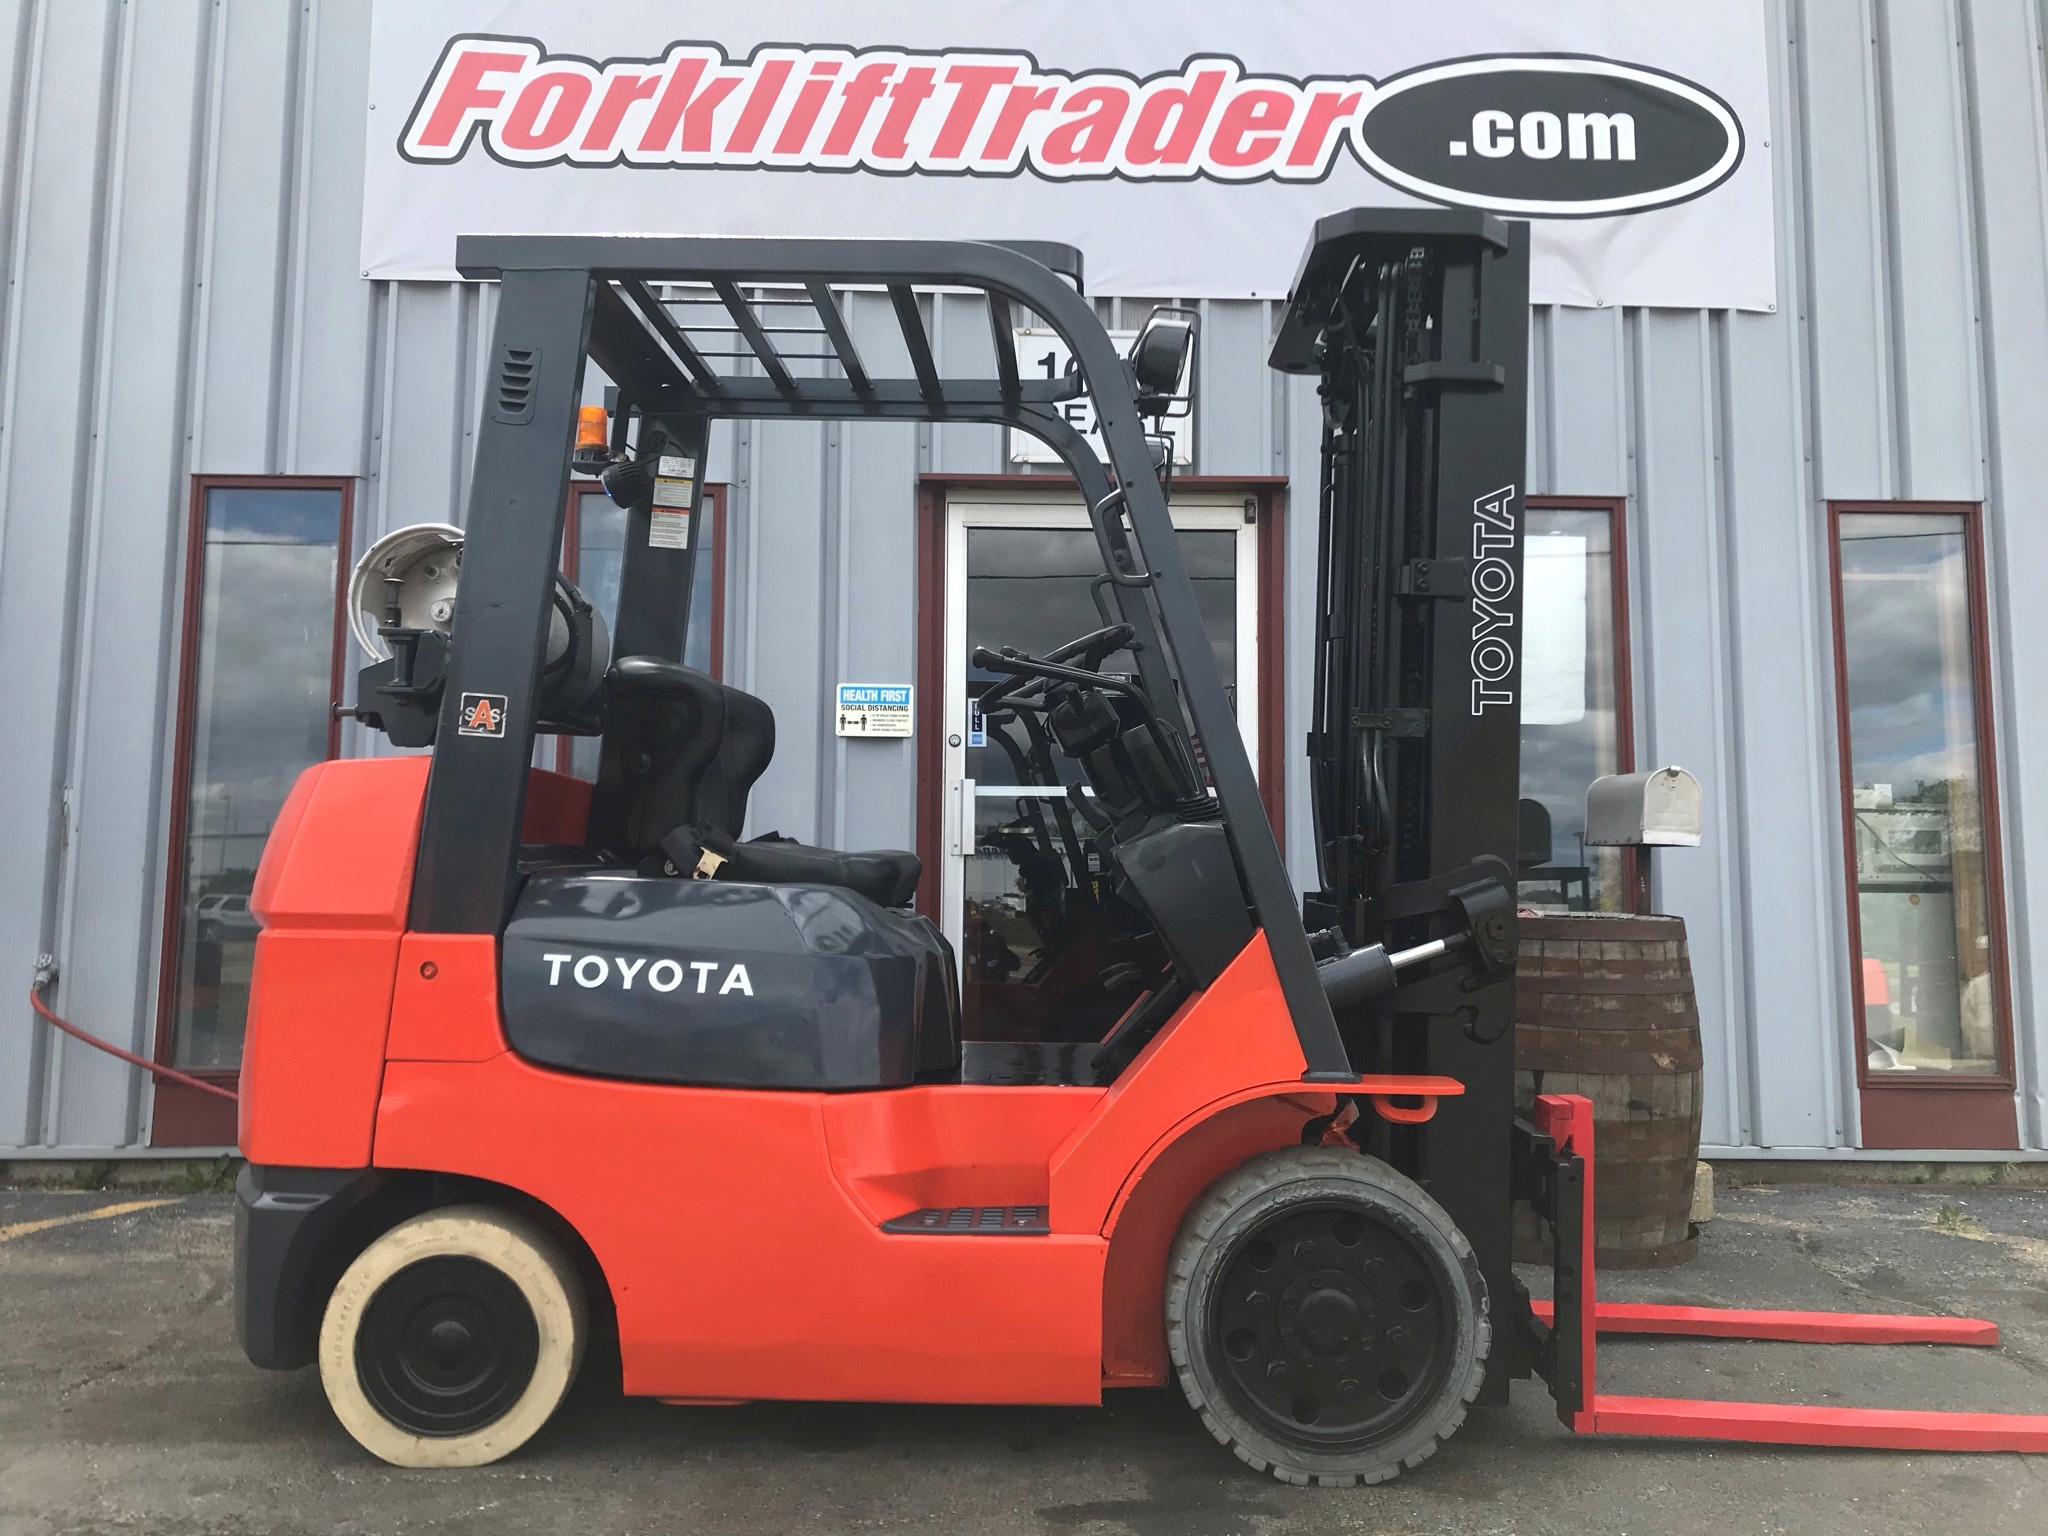 2007 toyota forklift with cushion tires for sale